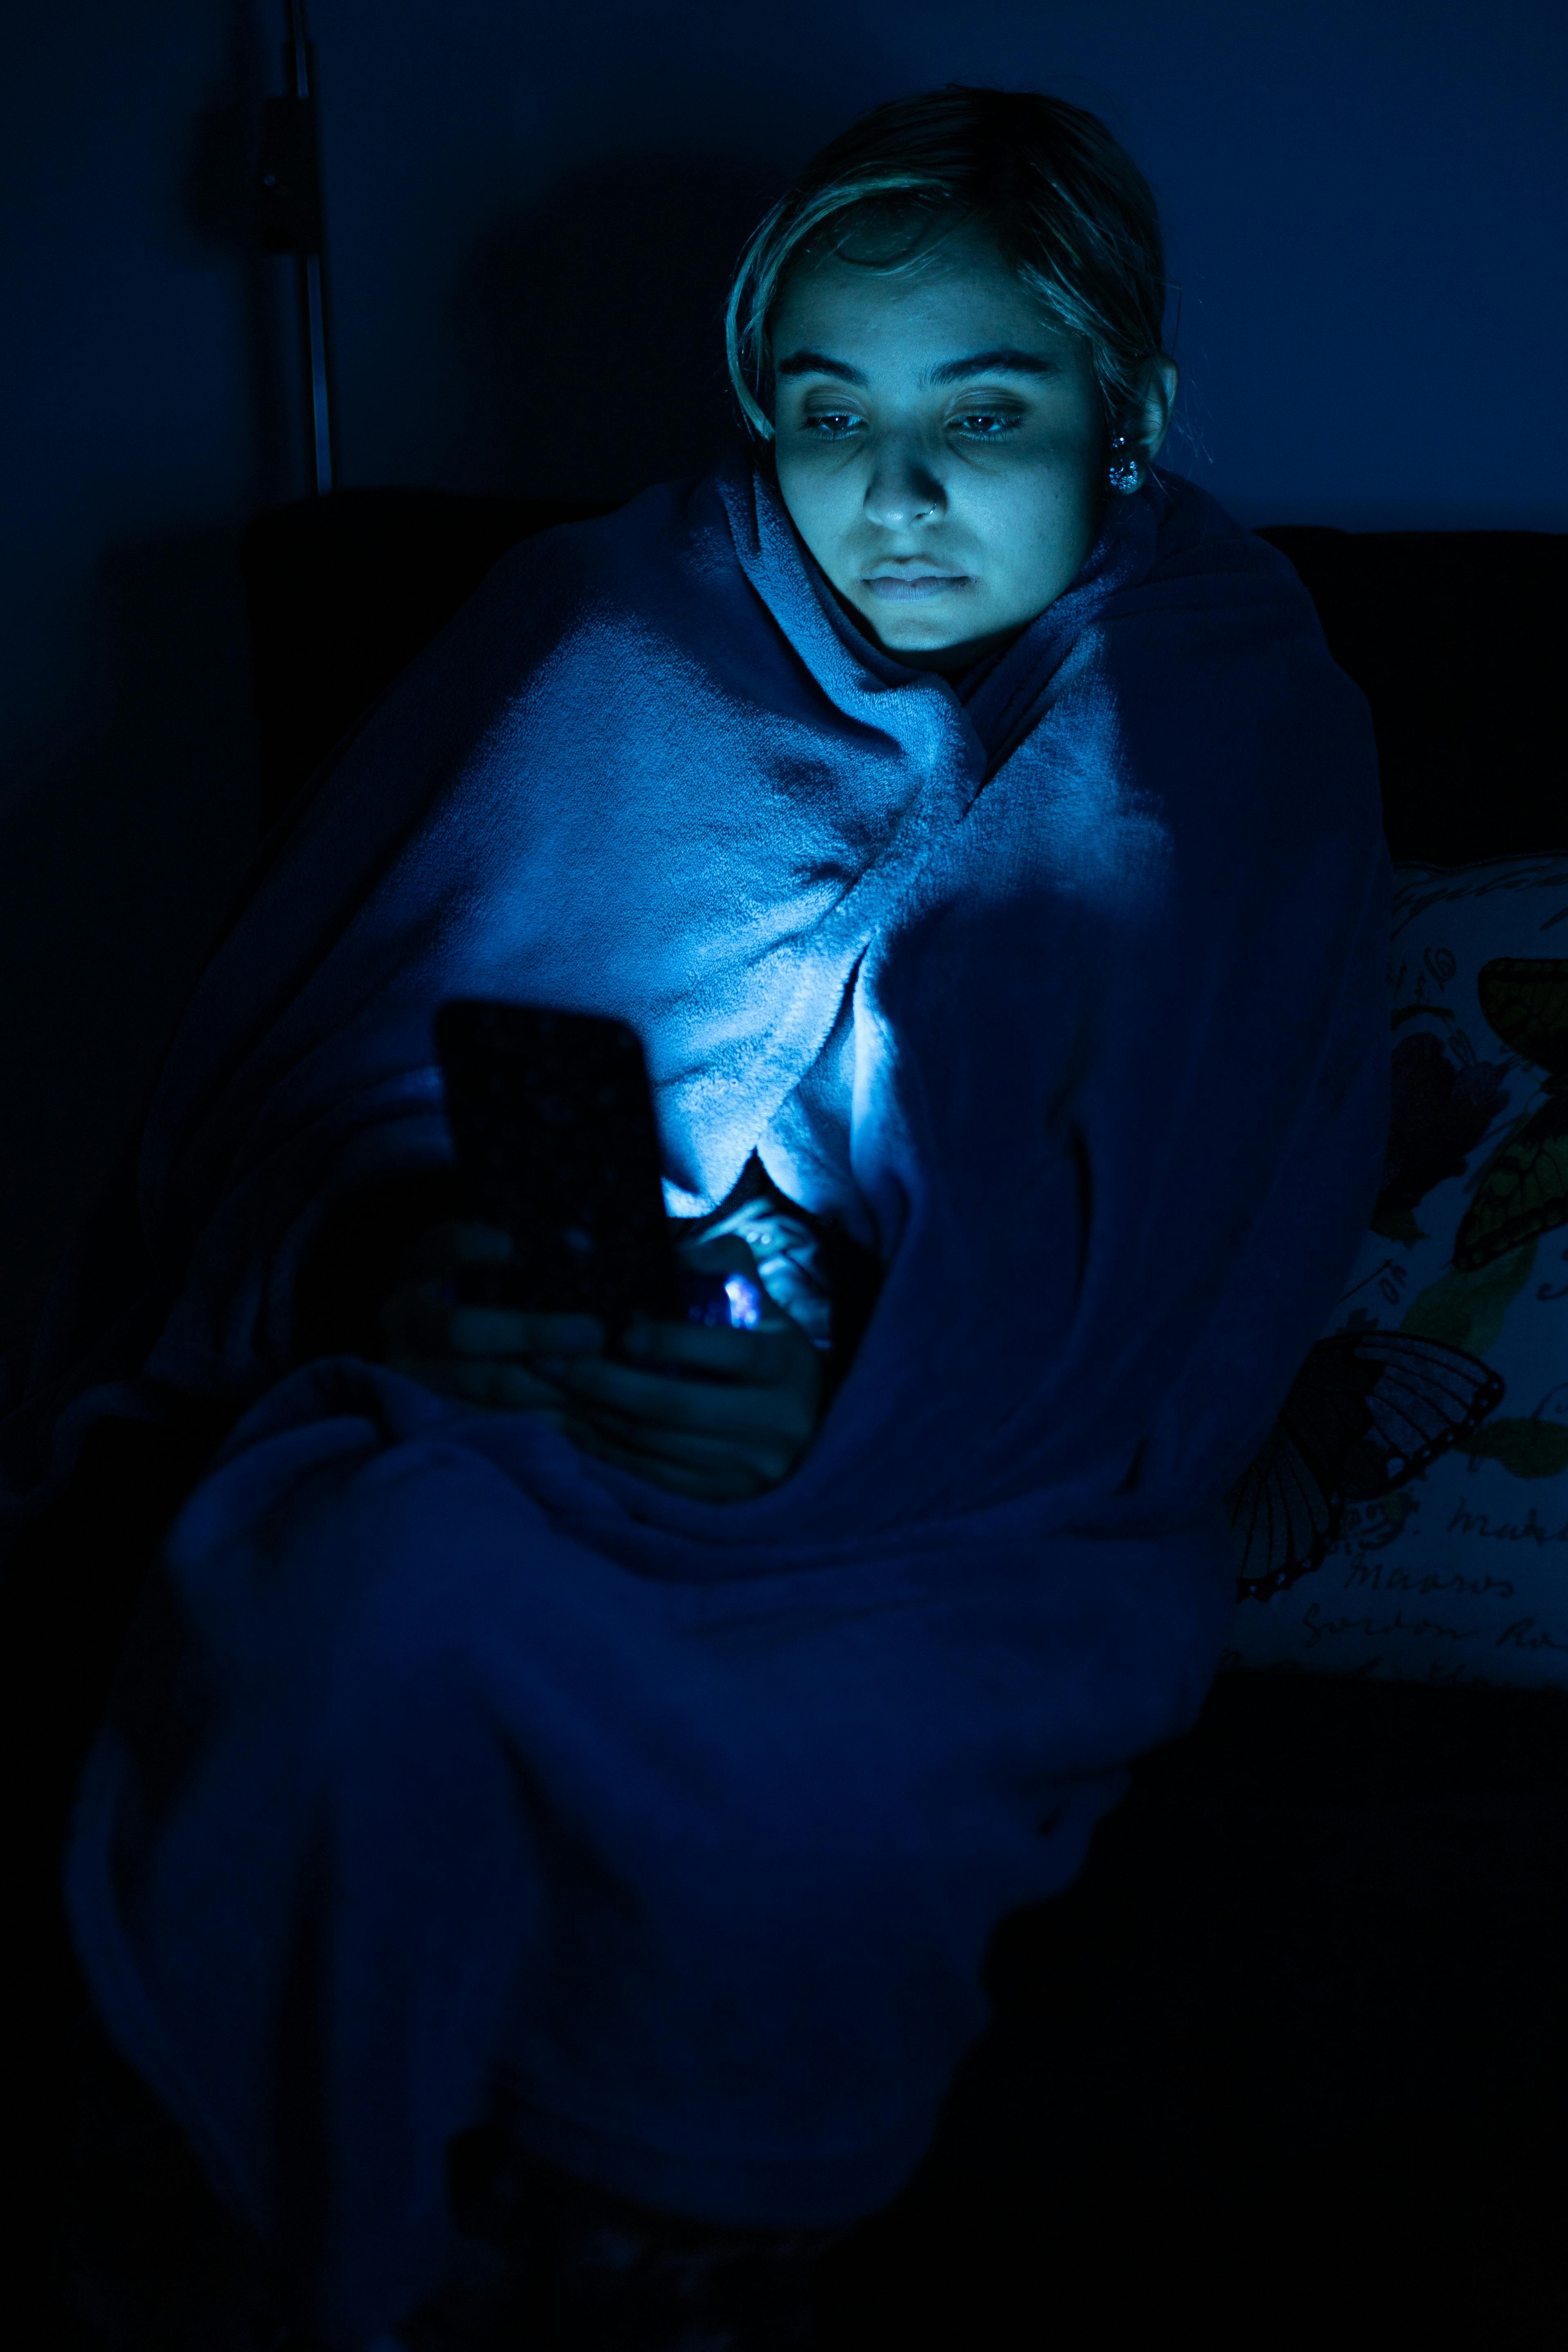 Sleep Better By Turning Your iPhone Blue Light Background to Red - Here's How